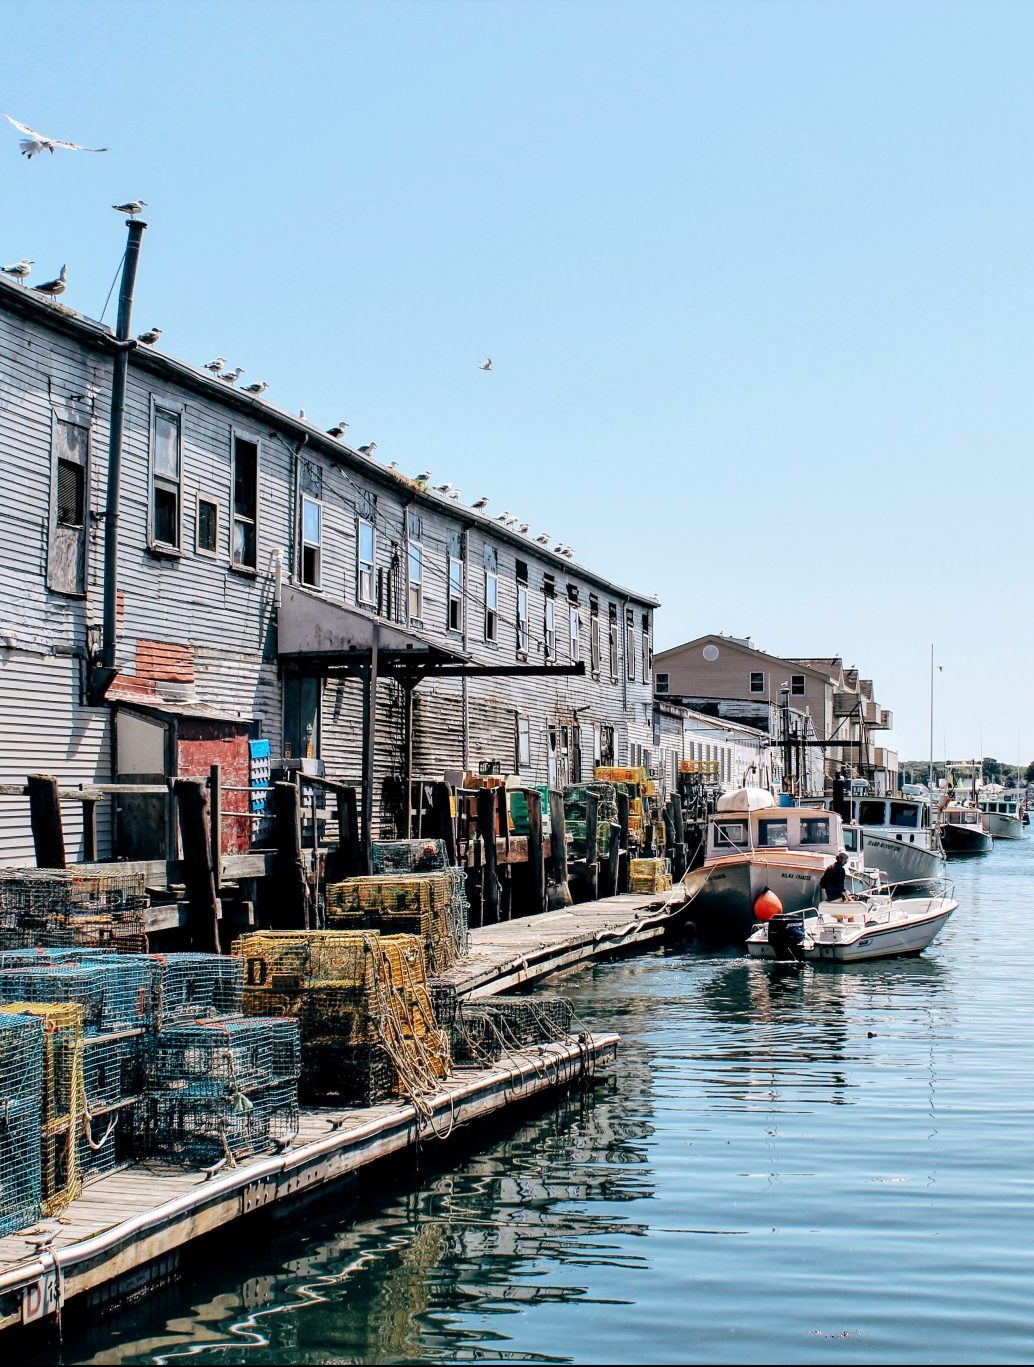 Travel blogger Meaghan Murray shares a city guide for Portland, Maine on her blog The Stopover